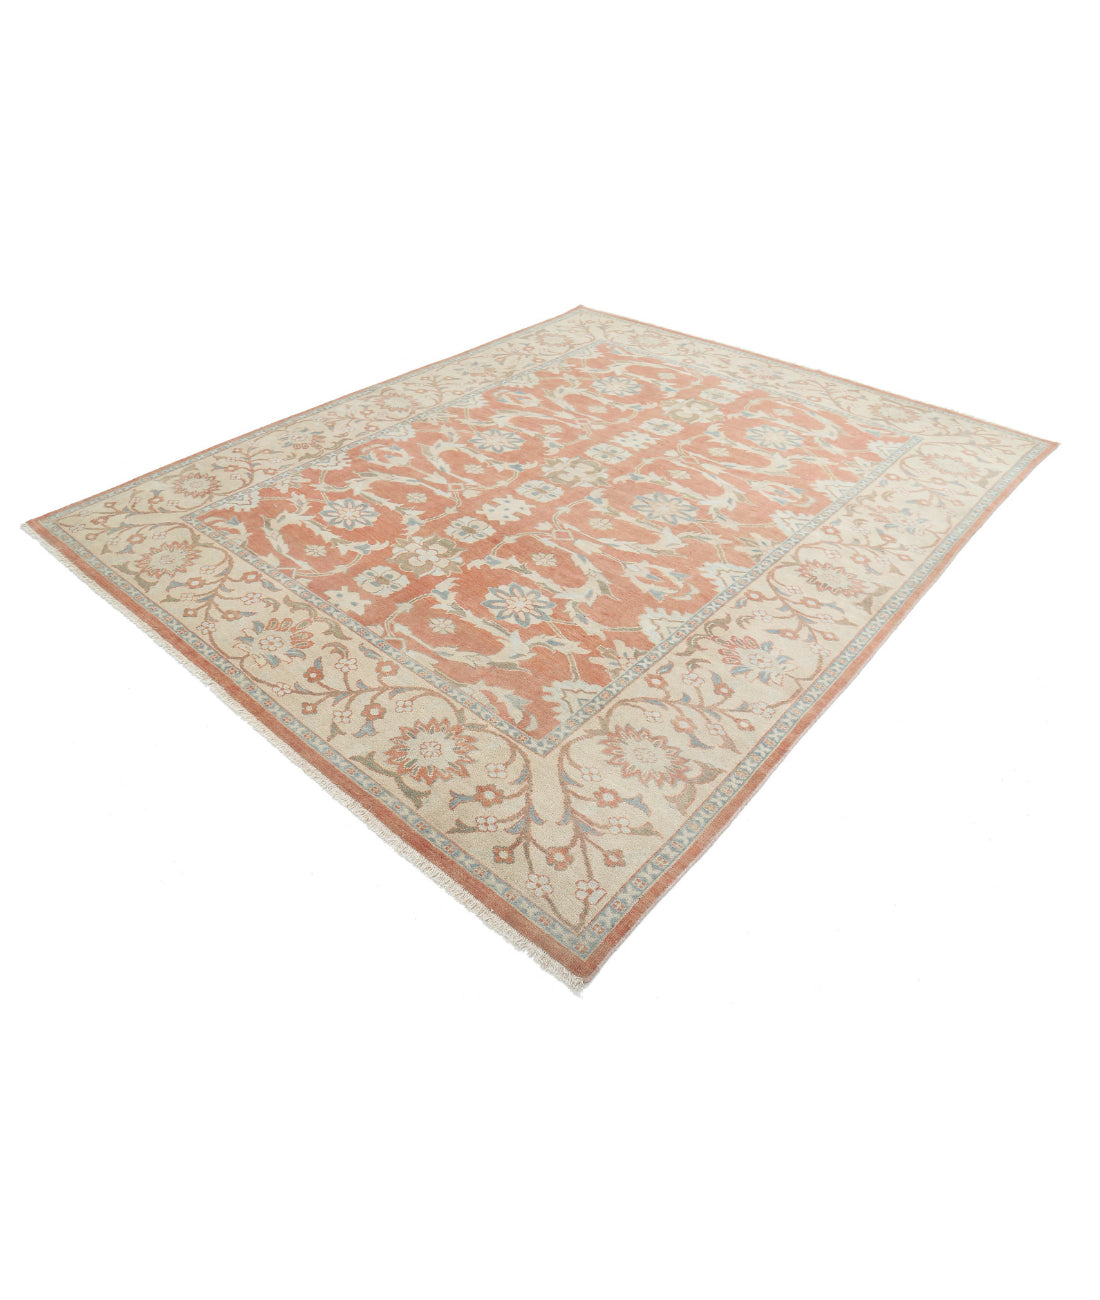 Hand Knotted Antique Persian Mahal Wool Rug - 8'0'' x 9'9'' 8'0'' x 9'9'' (240 X 293) / Peach / Beige